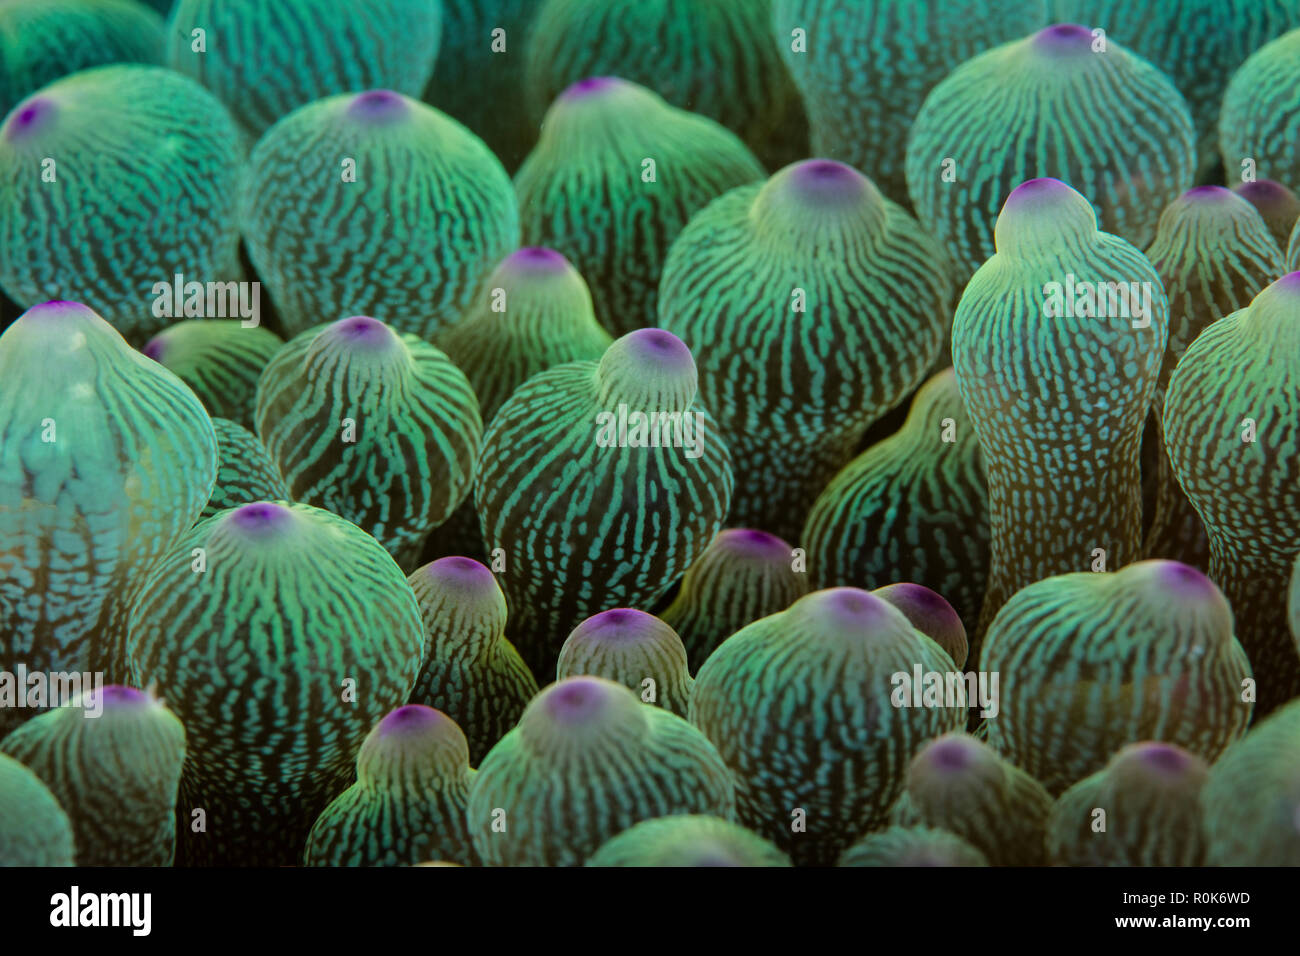 Abstract of the tentacles on a bulbed-anemone in Lembeh Strait, Indonesia. Stock Photo